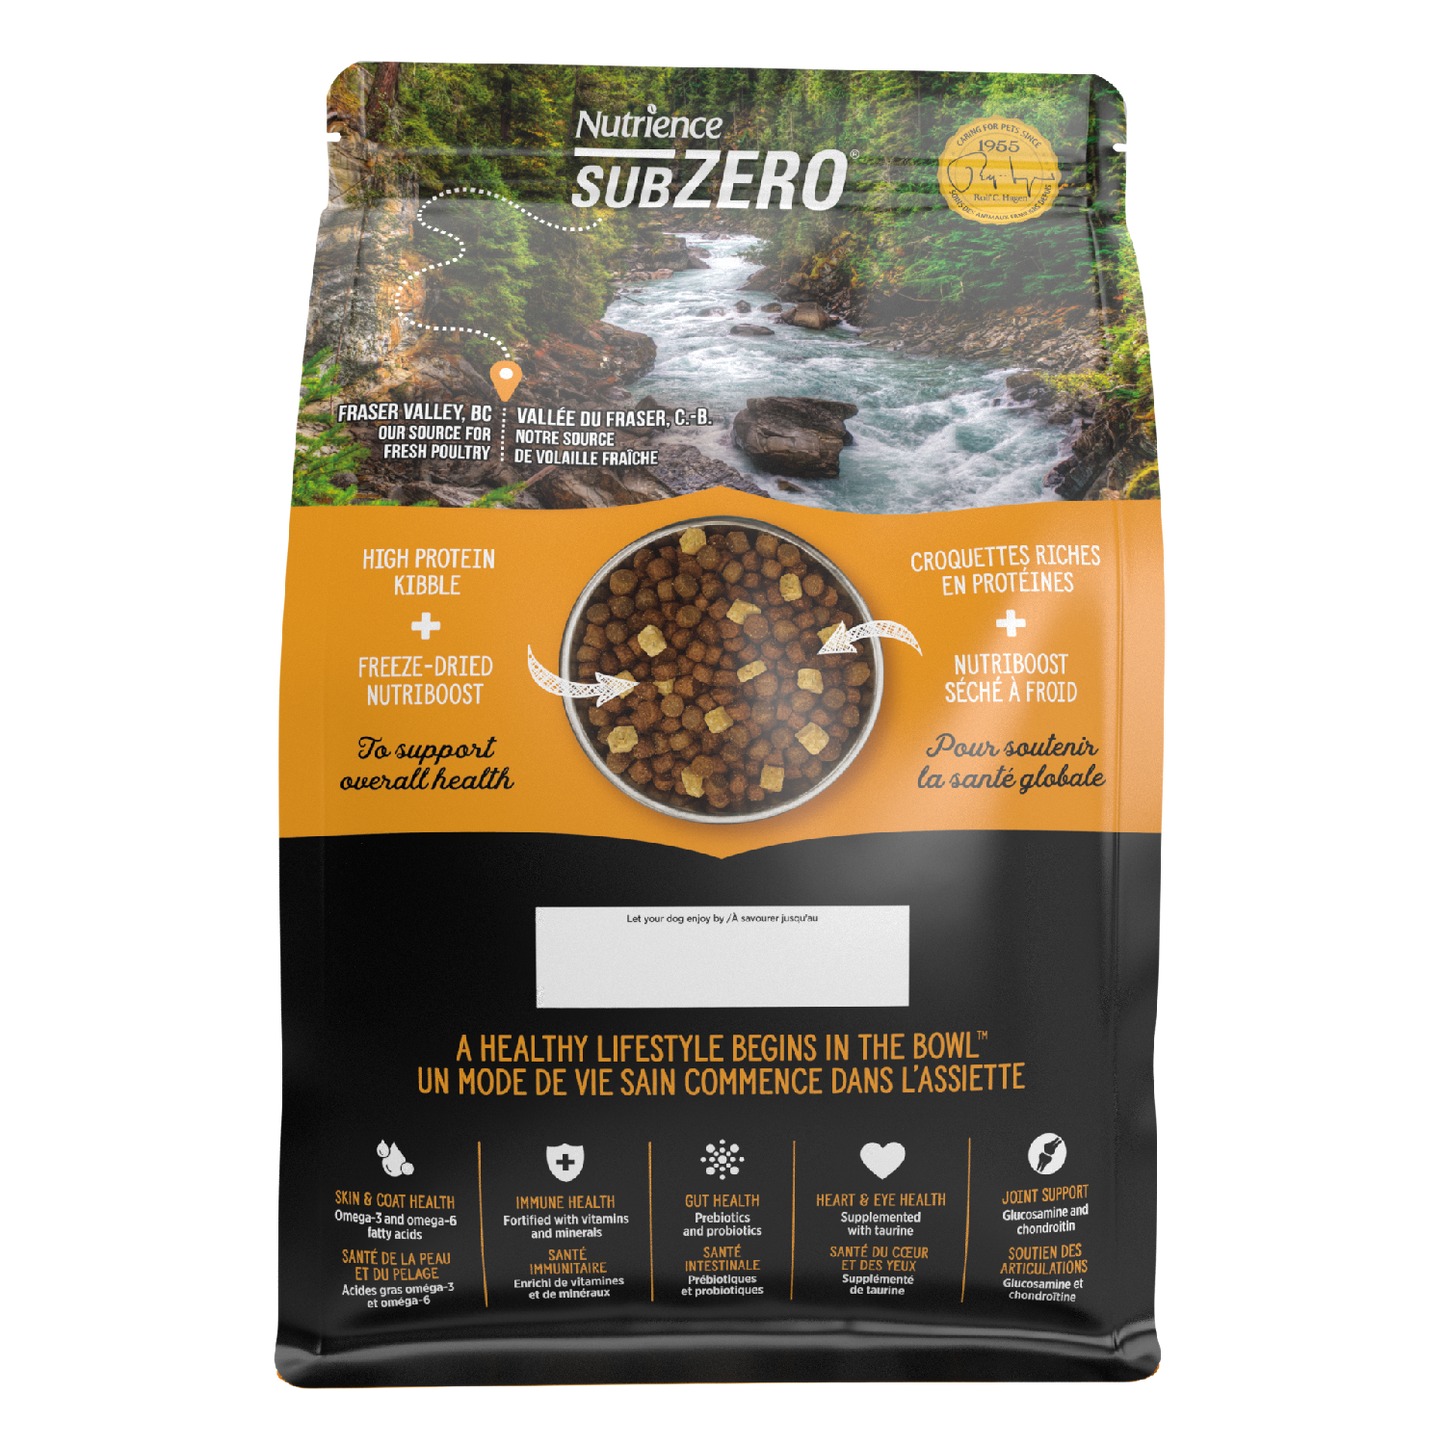 Nutrience Grain Free SubZero Fraser Valley Formula for Small Breed Dogs  Dog Food  | PetMax Canada